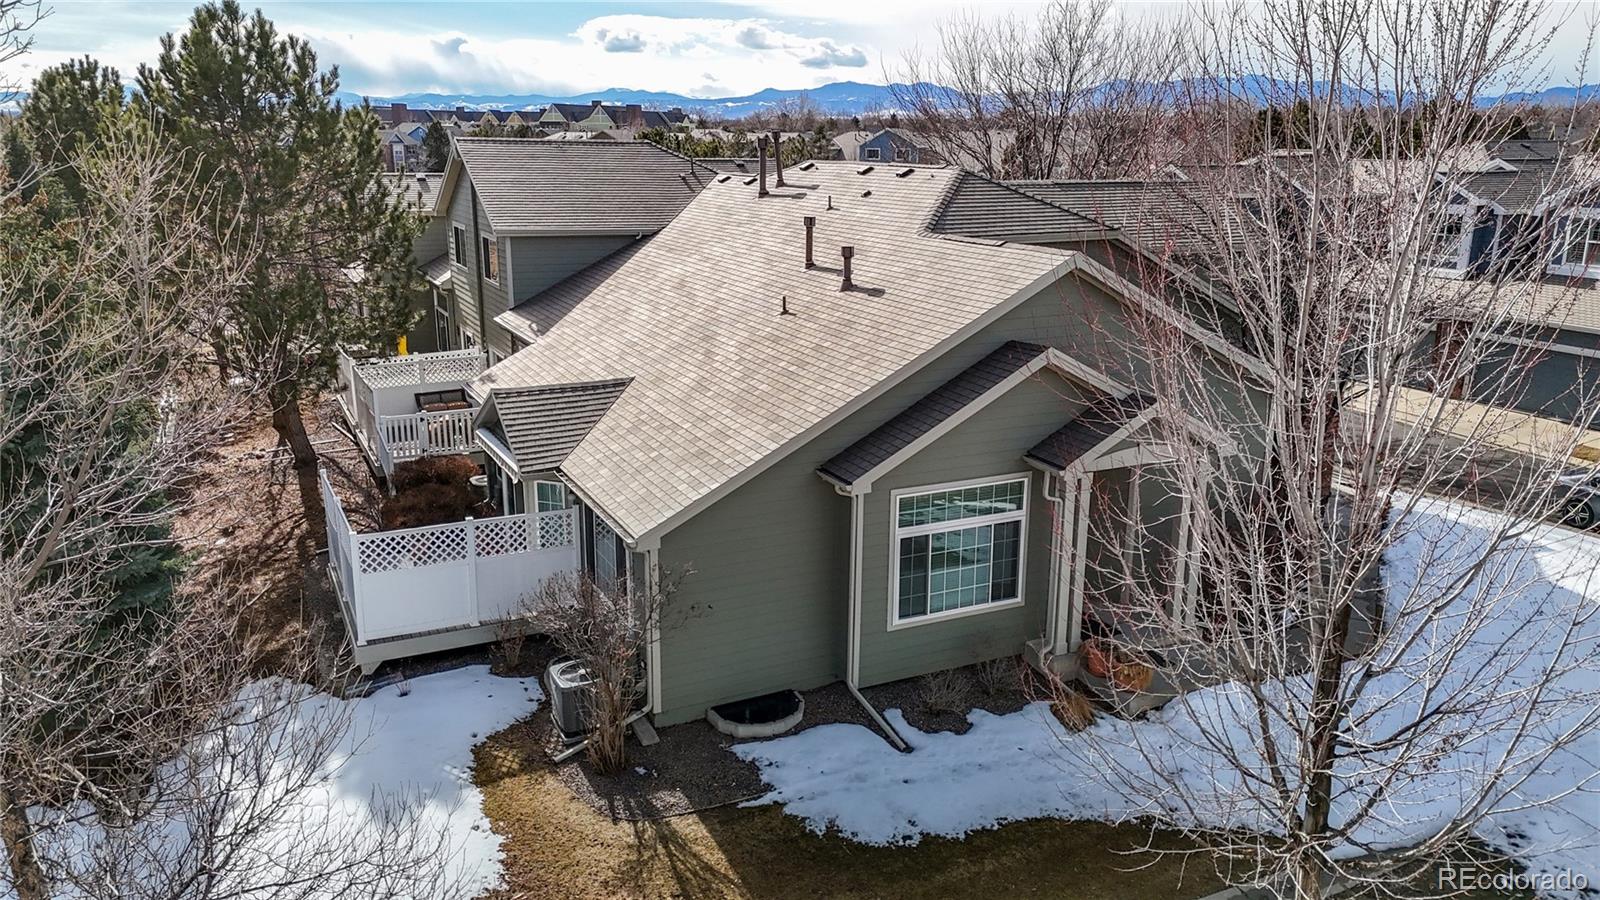 3474 W 125th Point, broomfield MLS: 4221466 Beds: 3 Baths: 3 Price: $600,000